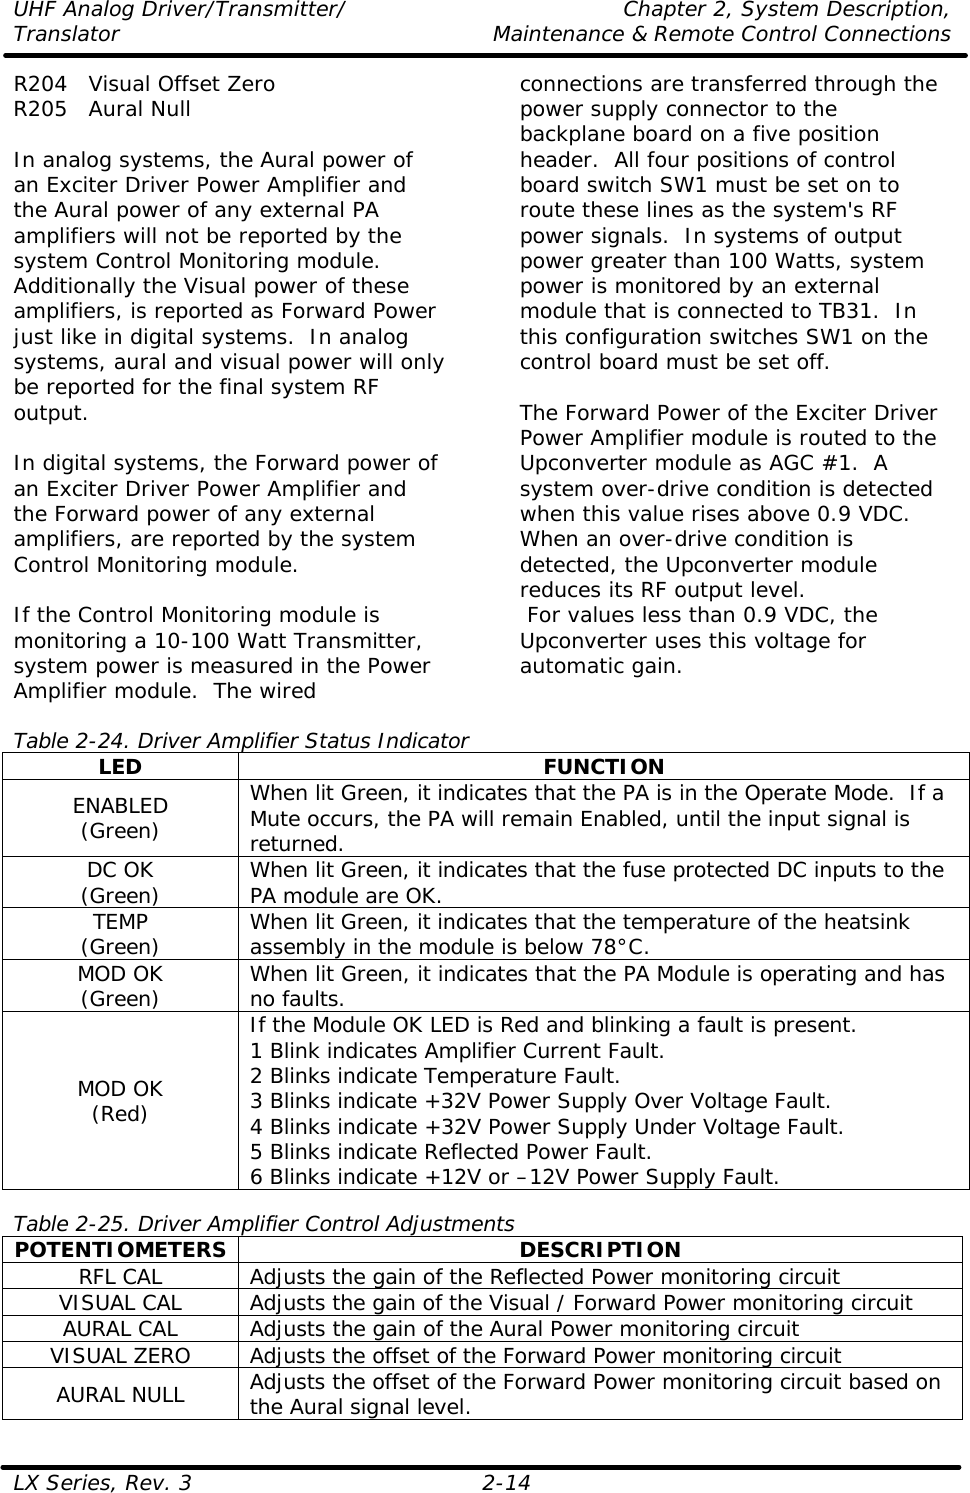 UHF Analog Driver/Transmitter/ Chapter 2, System Description, Translator Maintenance &amp; Remote Control Connections LX Series, Rev. 3 2-14 R204 Visual Offset Zero R205 Aural Null  In analog systems, the Aural power of an Exciter Driver Power Amplifier and the Aural power of any external PA amplifiers will not be reported by the system Control Monitoring module.  Additionally the Visual power of these amplifiers, is reported as Forward Power just like in digital systems.  In analog systems, aural and visual power will only be reported for the final system RF output.    In digital systems, the Forward power of an Exciter Driver Power Amplifier and the Forward power of any external amplifiers, are reported by the system Control Monitoring module.   If the Control Monitoring module is monitoring a 10-100 Watt Transmitter, system power is measured in the Power Amplifier module.  The wired connections are transferred through the power supply connector to the backplane board on a five position header.  All four positions of control board switch SW1 must be set on to route these lines as the system&apos;s RF power signals.  In systems of output power greater than 100 Watts, system power is monitored by an external module that is connected to TB31.  In this configuration switches SW1 on the control board must be set off.   The Forward Power of the Exciter Driver Power Amplifier module is routed to the Upconverter module as AGC #1.  A system over-drive condition is detected when this value rises above 0.9 VDC.  When an over-drive condition is detected, the Upconverter module reduces its RF output level.  For values less than 0.9 VDC, the Upconverter uses this voltage for automatic gain.   Table 2-24. Driver Amplifier Status Indicator LED FUNCTION ENABLED (Green) When lit Green, it indicates that the PA is in the Operate Mode.  If a Mute occurs, the PA will remain Enabled, until the input signal is returned. DC OK (Green) When lit Green, it indicates that the fuse protected DC inputs to the PA module are OK. TEMP (Green) When lit Green, it indicates that the temperature of the heatsink assembly in the module is below 78°C. MOD OK (Green) When lit Green, it indicates that the PA Module is operating and has no faults. MOD OK (Red) If the Module OK LED is Red and blinking a fault is present. 1 Blink indicates Amplifier Current Fault. 2 Blinks indicate Temperature Fault. 3 Blinks indicate +32V Power Supply Over Voltage Fault. 4 Blinks indicate +32V Power Supply Under Voltage Fault. 5 Blinks indicate Reflected Power Fault. 6 Blinks indicate +12V or –12V Power Supply Fault.  Table 2-25. Driver Amplifier Control Adjustments POTENTIOMETERS DESCRIPTION RFL CAL Adjusts the gain of the Reflected Power monitoring circuit VISUAL CAL Adjusts the gain of the Visual / Forward Power monitoring circuit AURAL CAL Adjusts the gain of the Aural Power monitoring circuit VISUAL ZERO Adjusts the offset of the Forward Power monitoring circuit AURAL NULL Adjusts the offset of the Forward Power monitoring circuit based on the Aural signal level.  